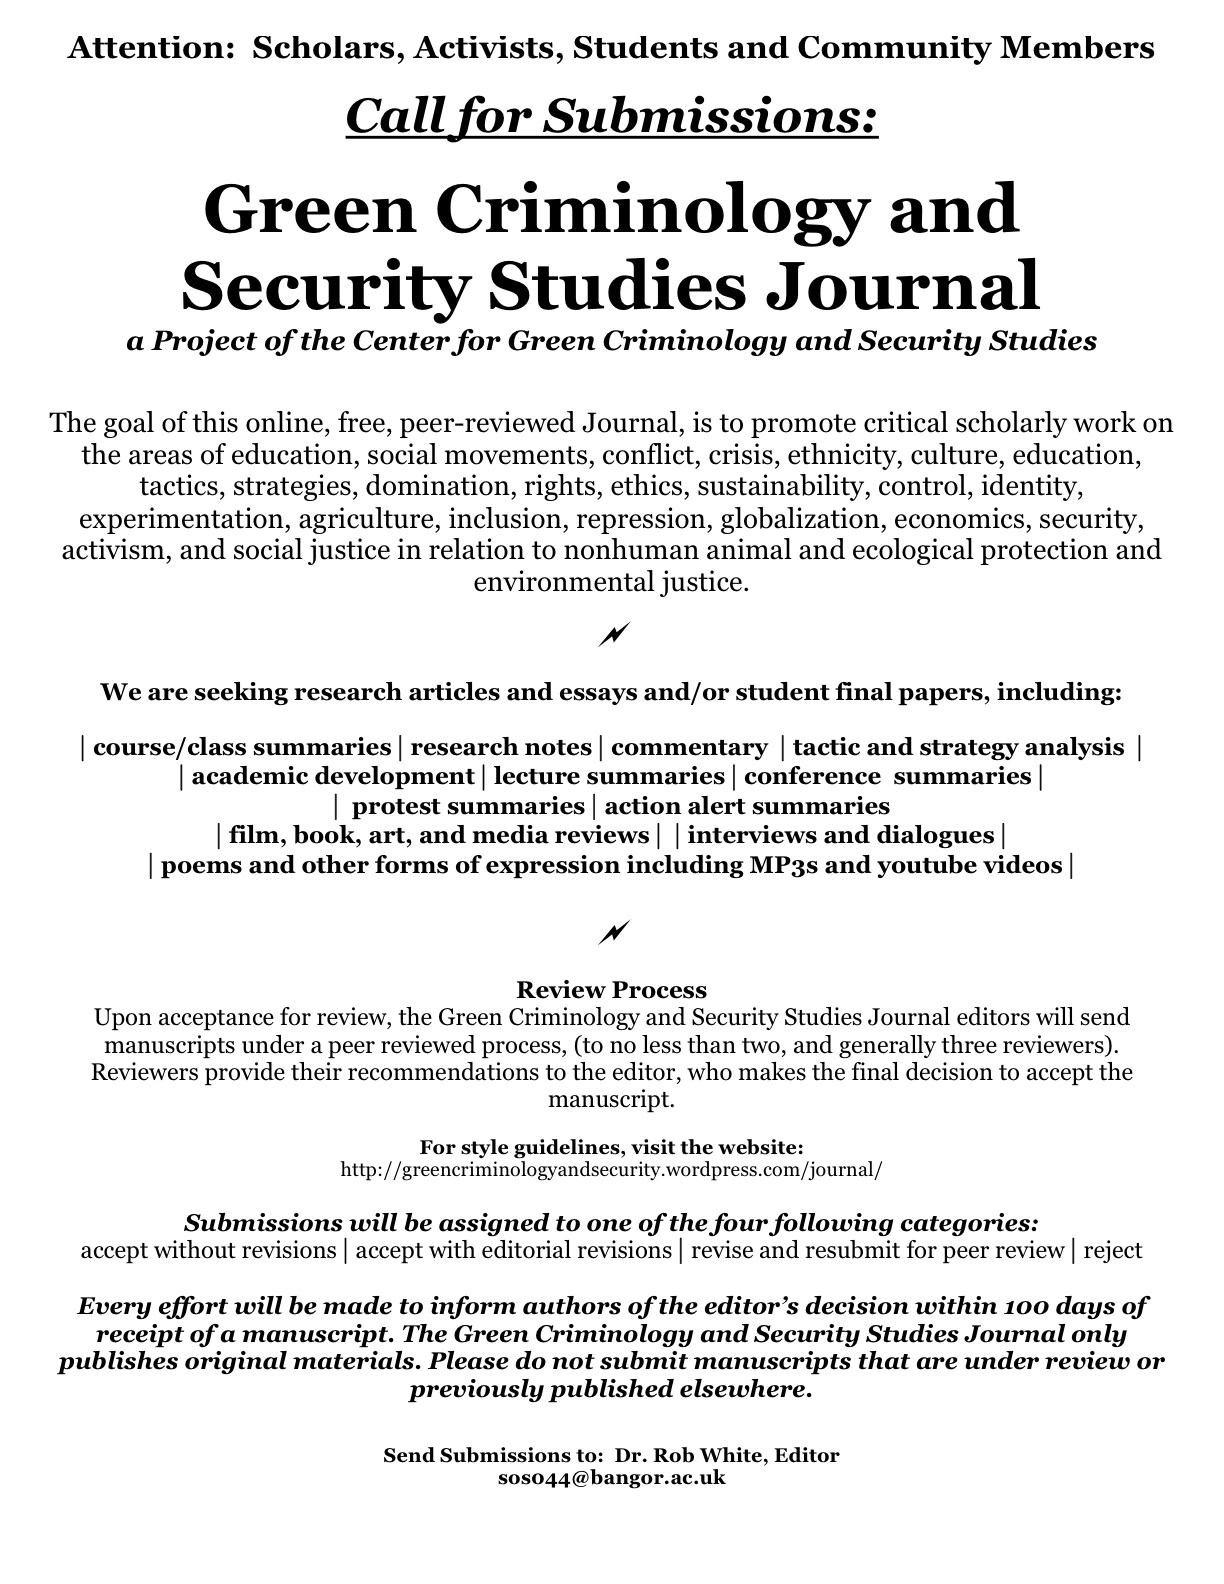  - green-criminology-and-security-studies-journal